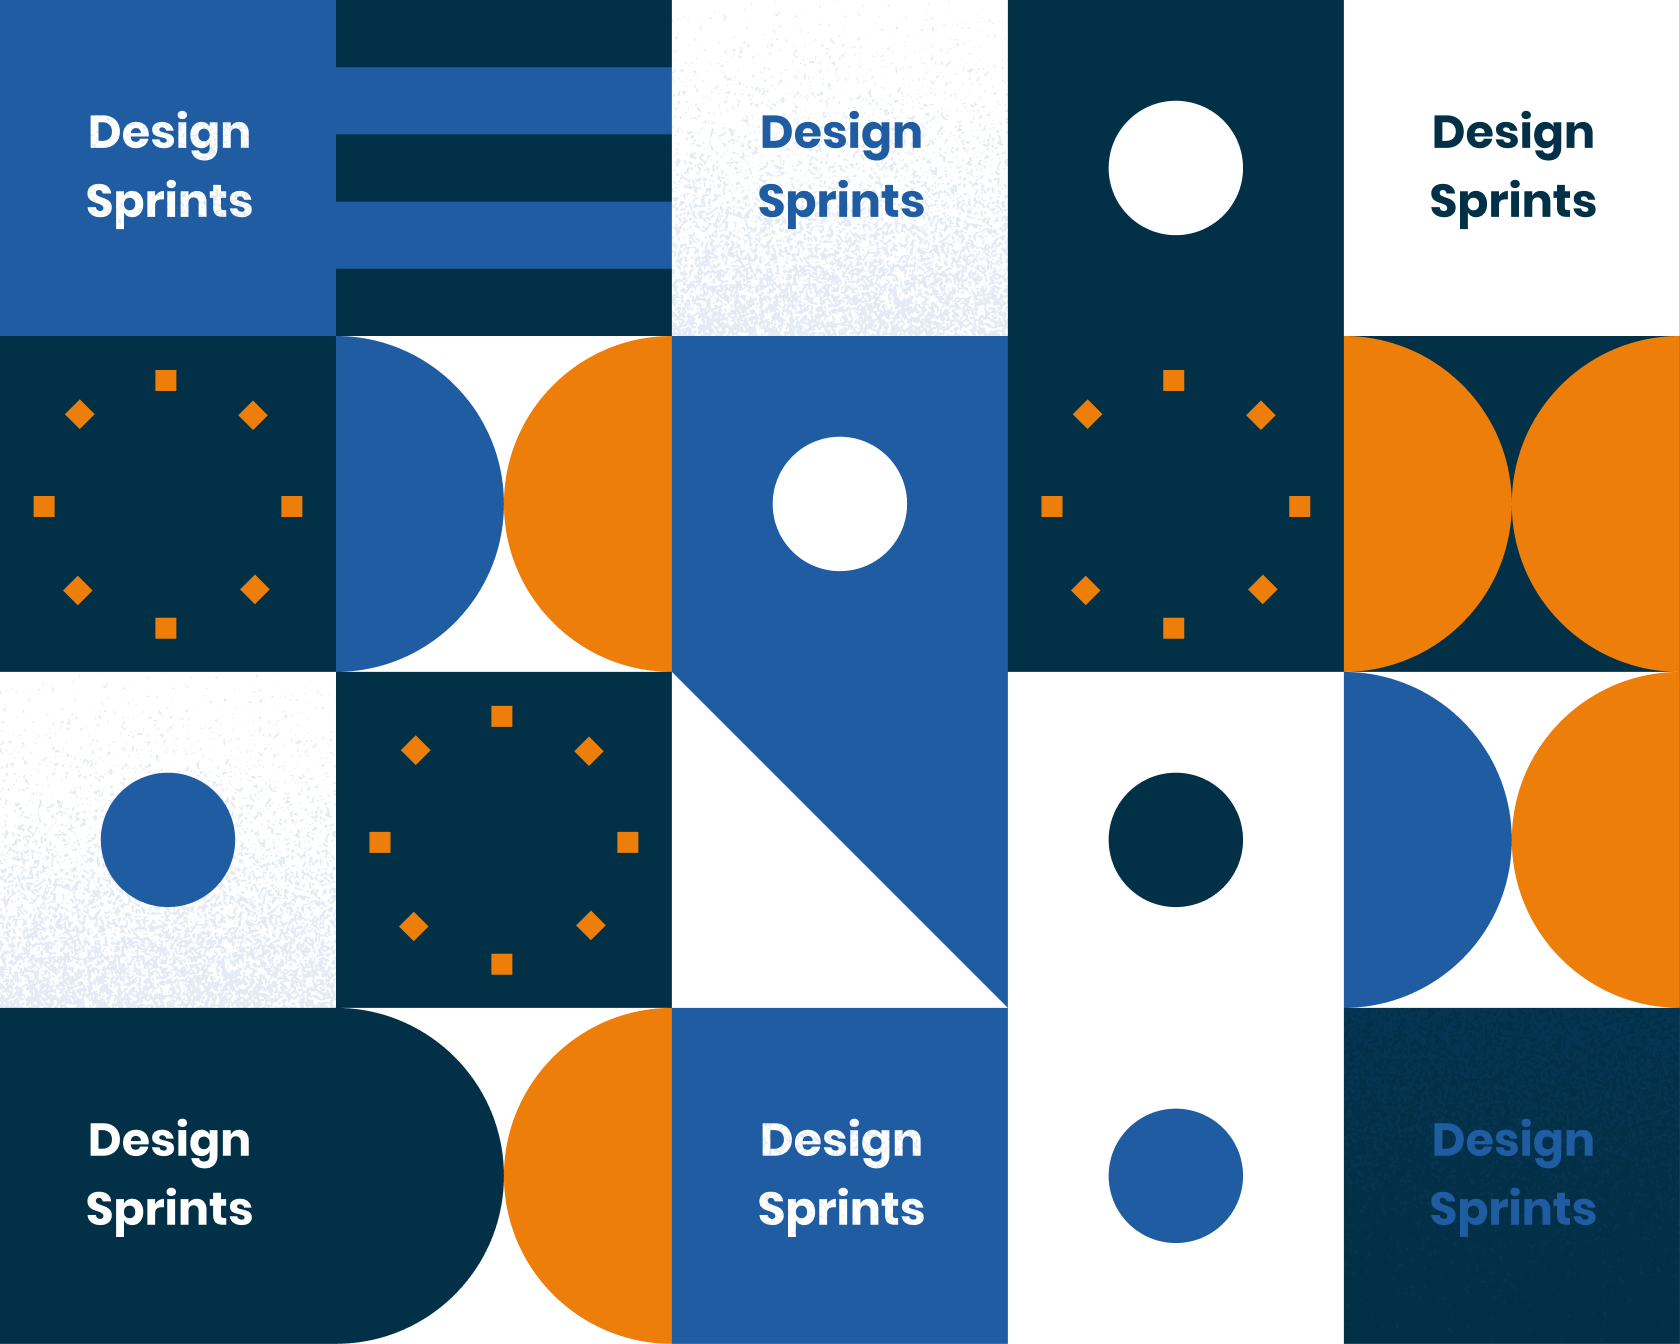 Get the ultimate guide to design sprints with the sprint book